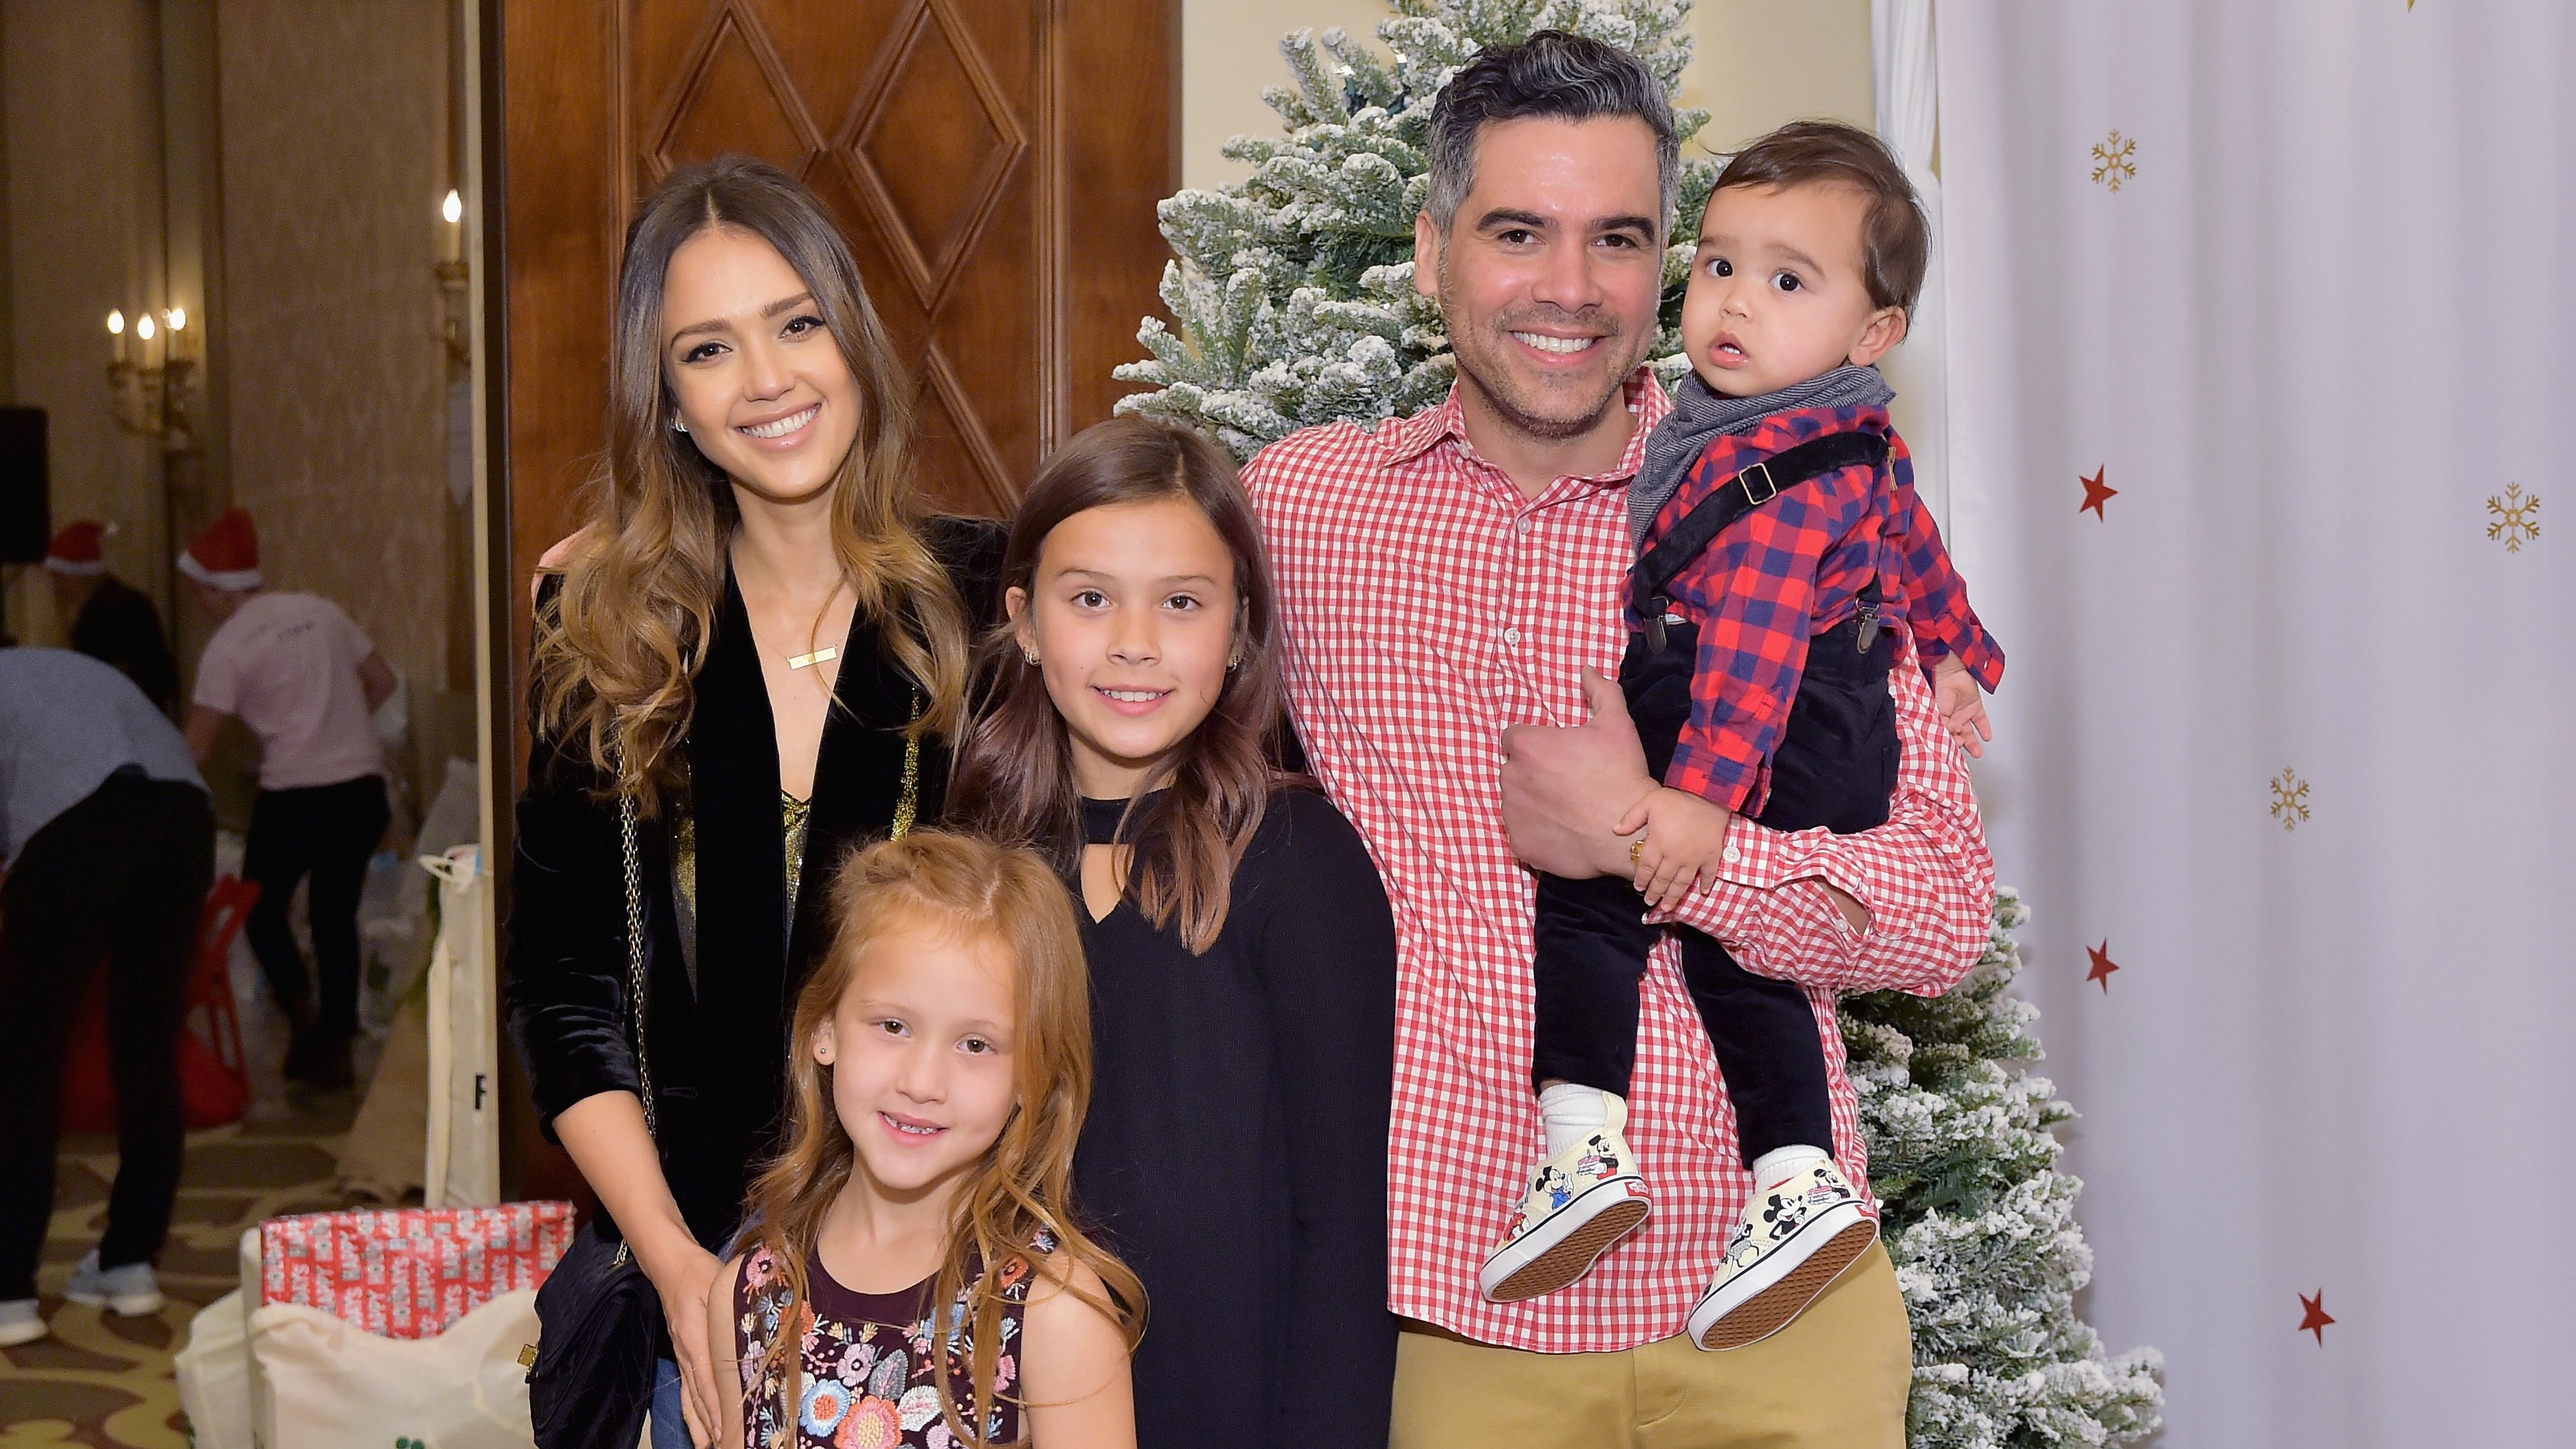 Jessica Alba And Cash Warren S Kids Meet The Couple S 3 Children Best gift to ring in the new year! alba captioned the adorable photo. jessica alba and cash warren s kids